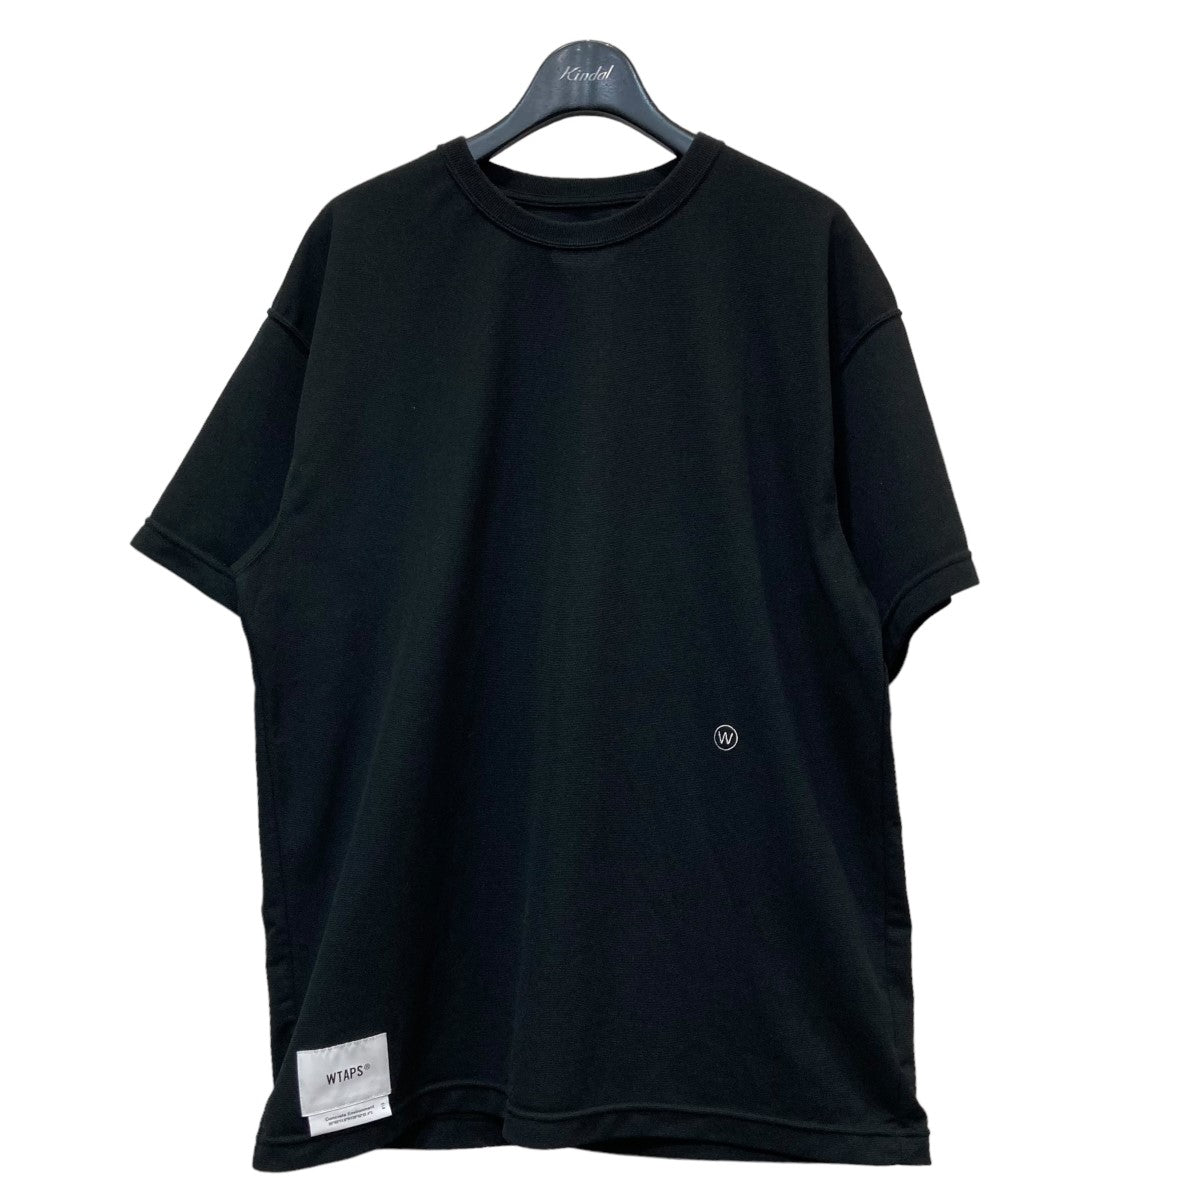 WTAPS(ダブルタップス) 23SS｢BIRTH ／ SS ／ POLY｣ Tシャツ 231ATDT 